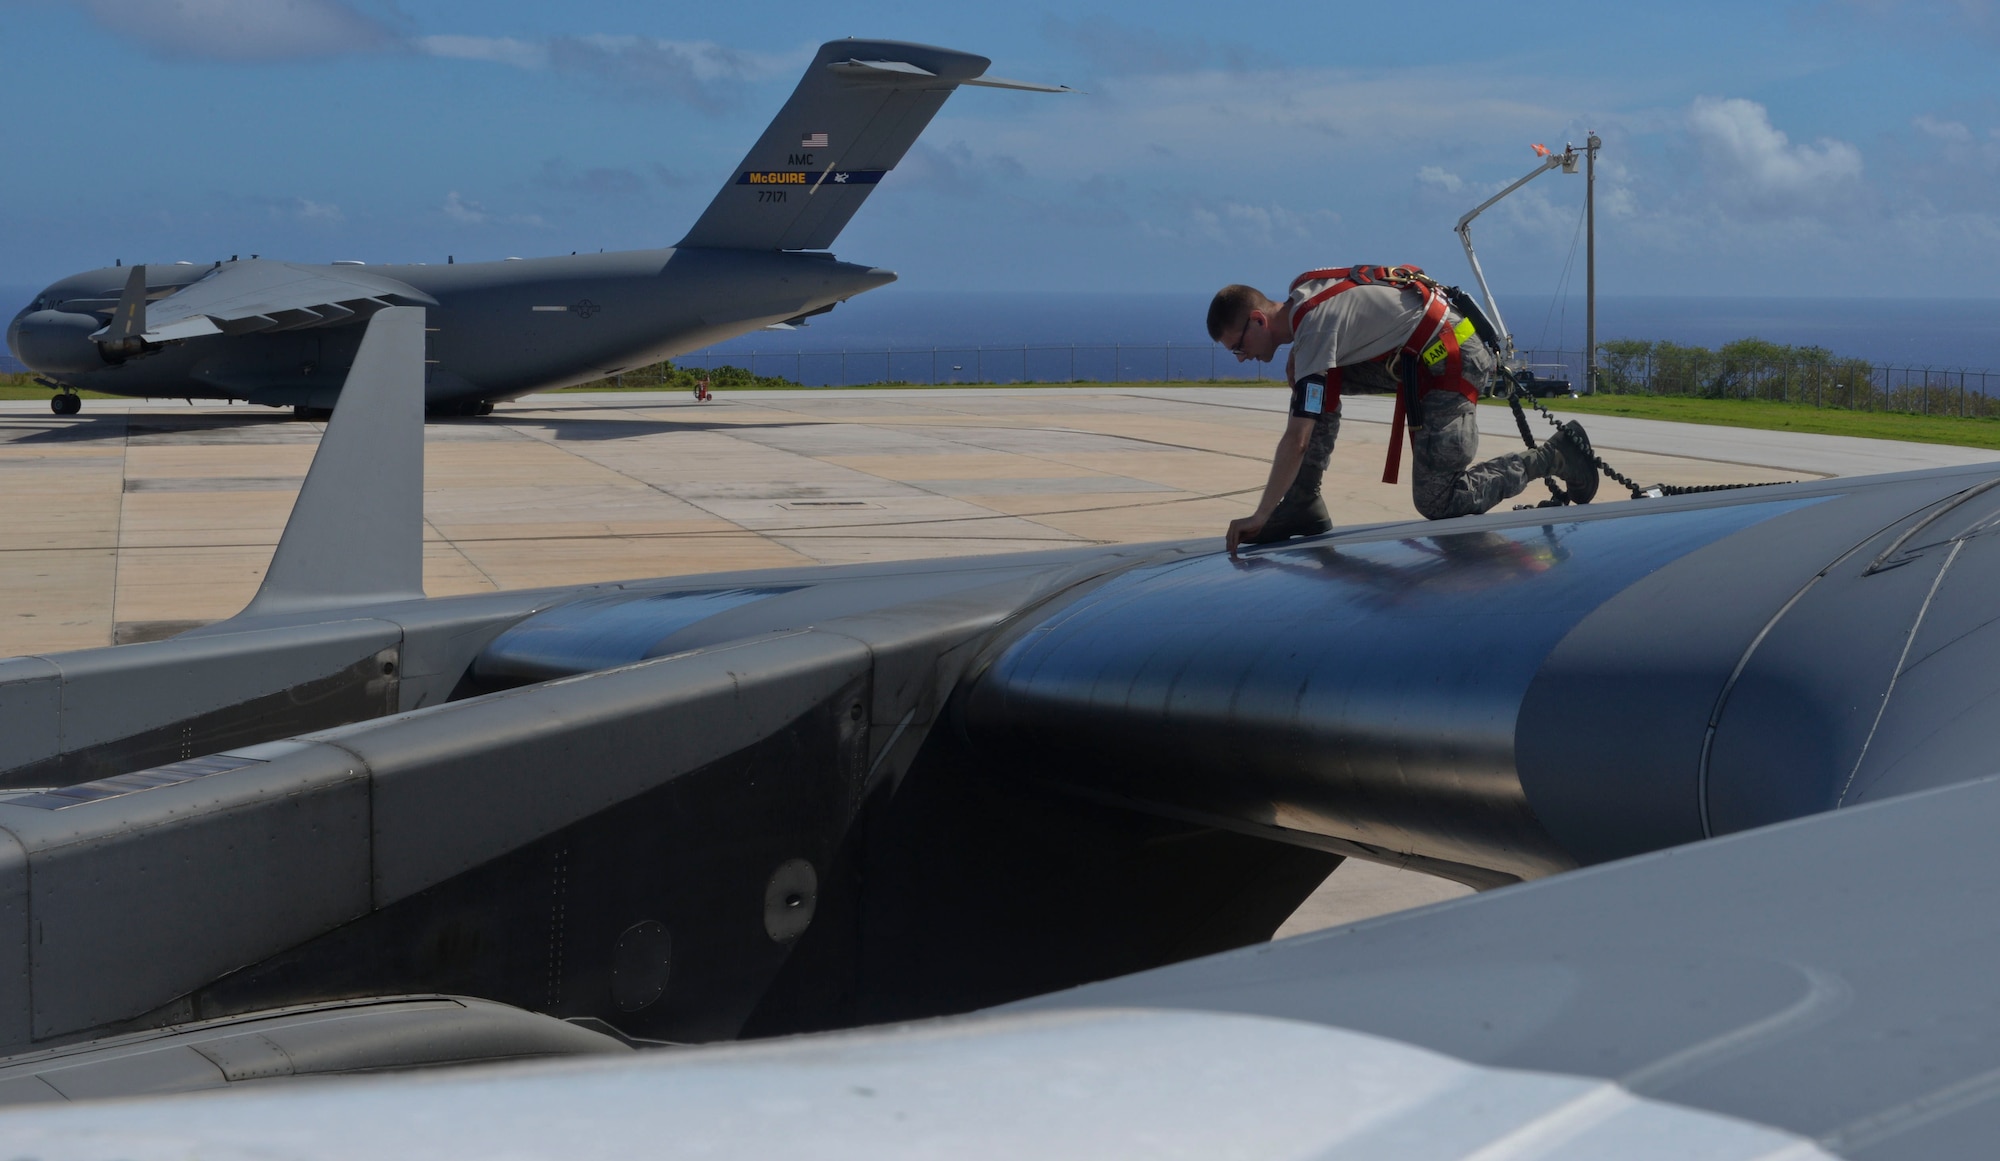 Senior Airman Evan Tweed, 734th Air Mobility Squadron guidance and control journeyman, prepares to check a fuel probe on a C-17 Globemaster Nov. 14, 2014, at Andersen Air Force Base, Guam. The 734th AMS Airmen worked on aircraft that directly supported President Barack Obama during his trip to Asia this month. (U.S. Air Force photo by Staff Sgt. Robert Hicks/Released) 